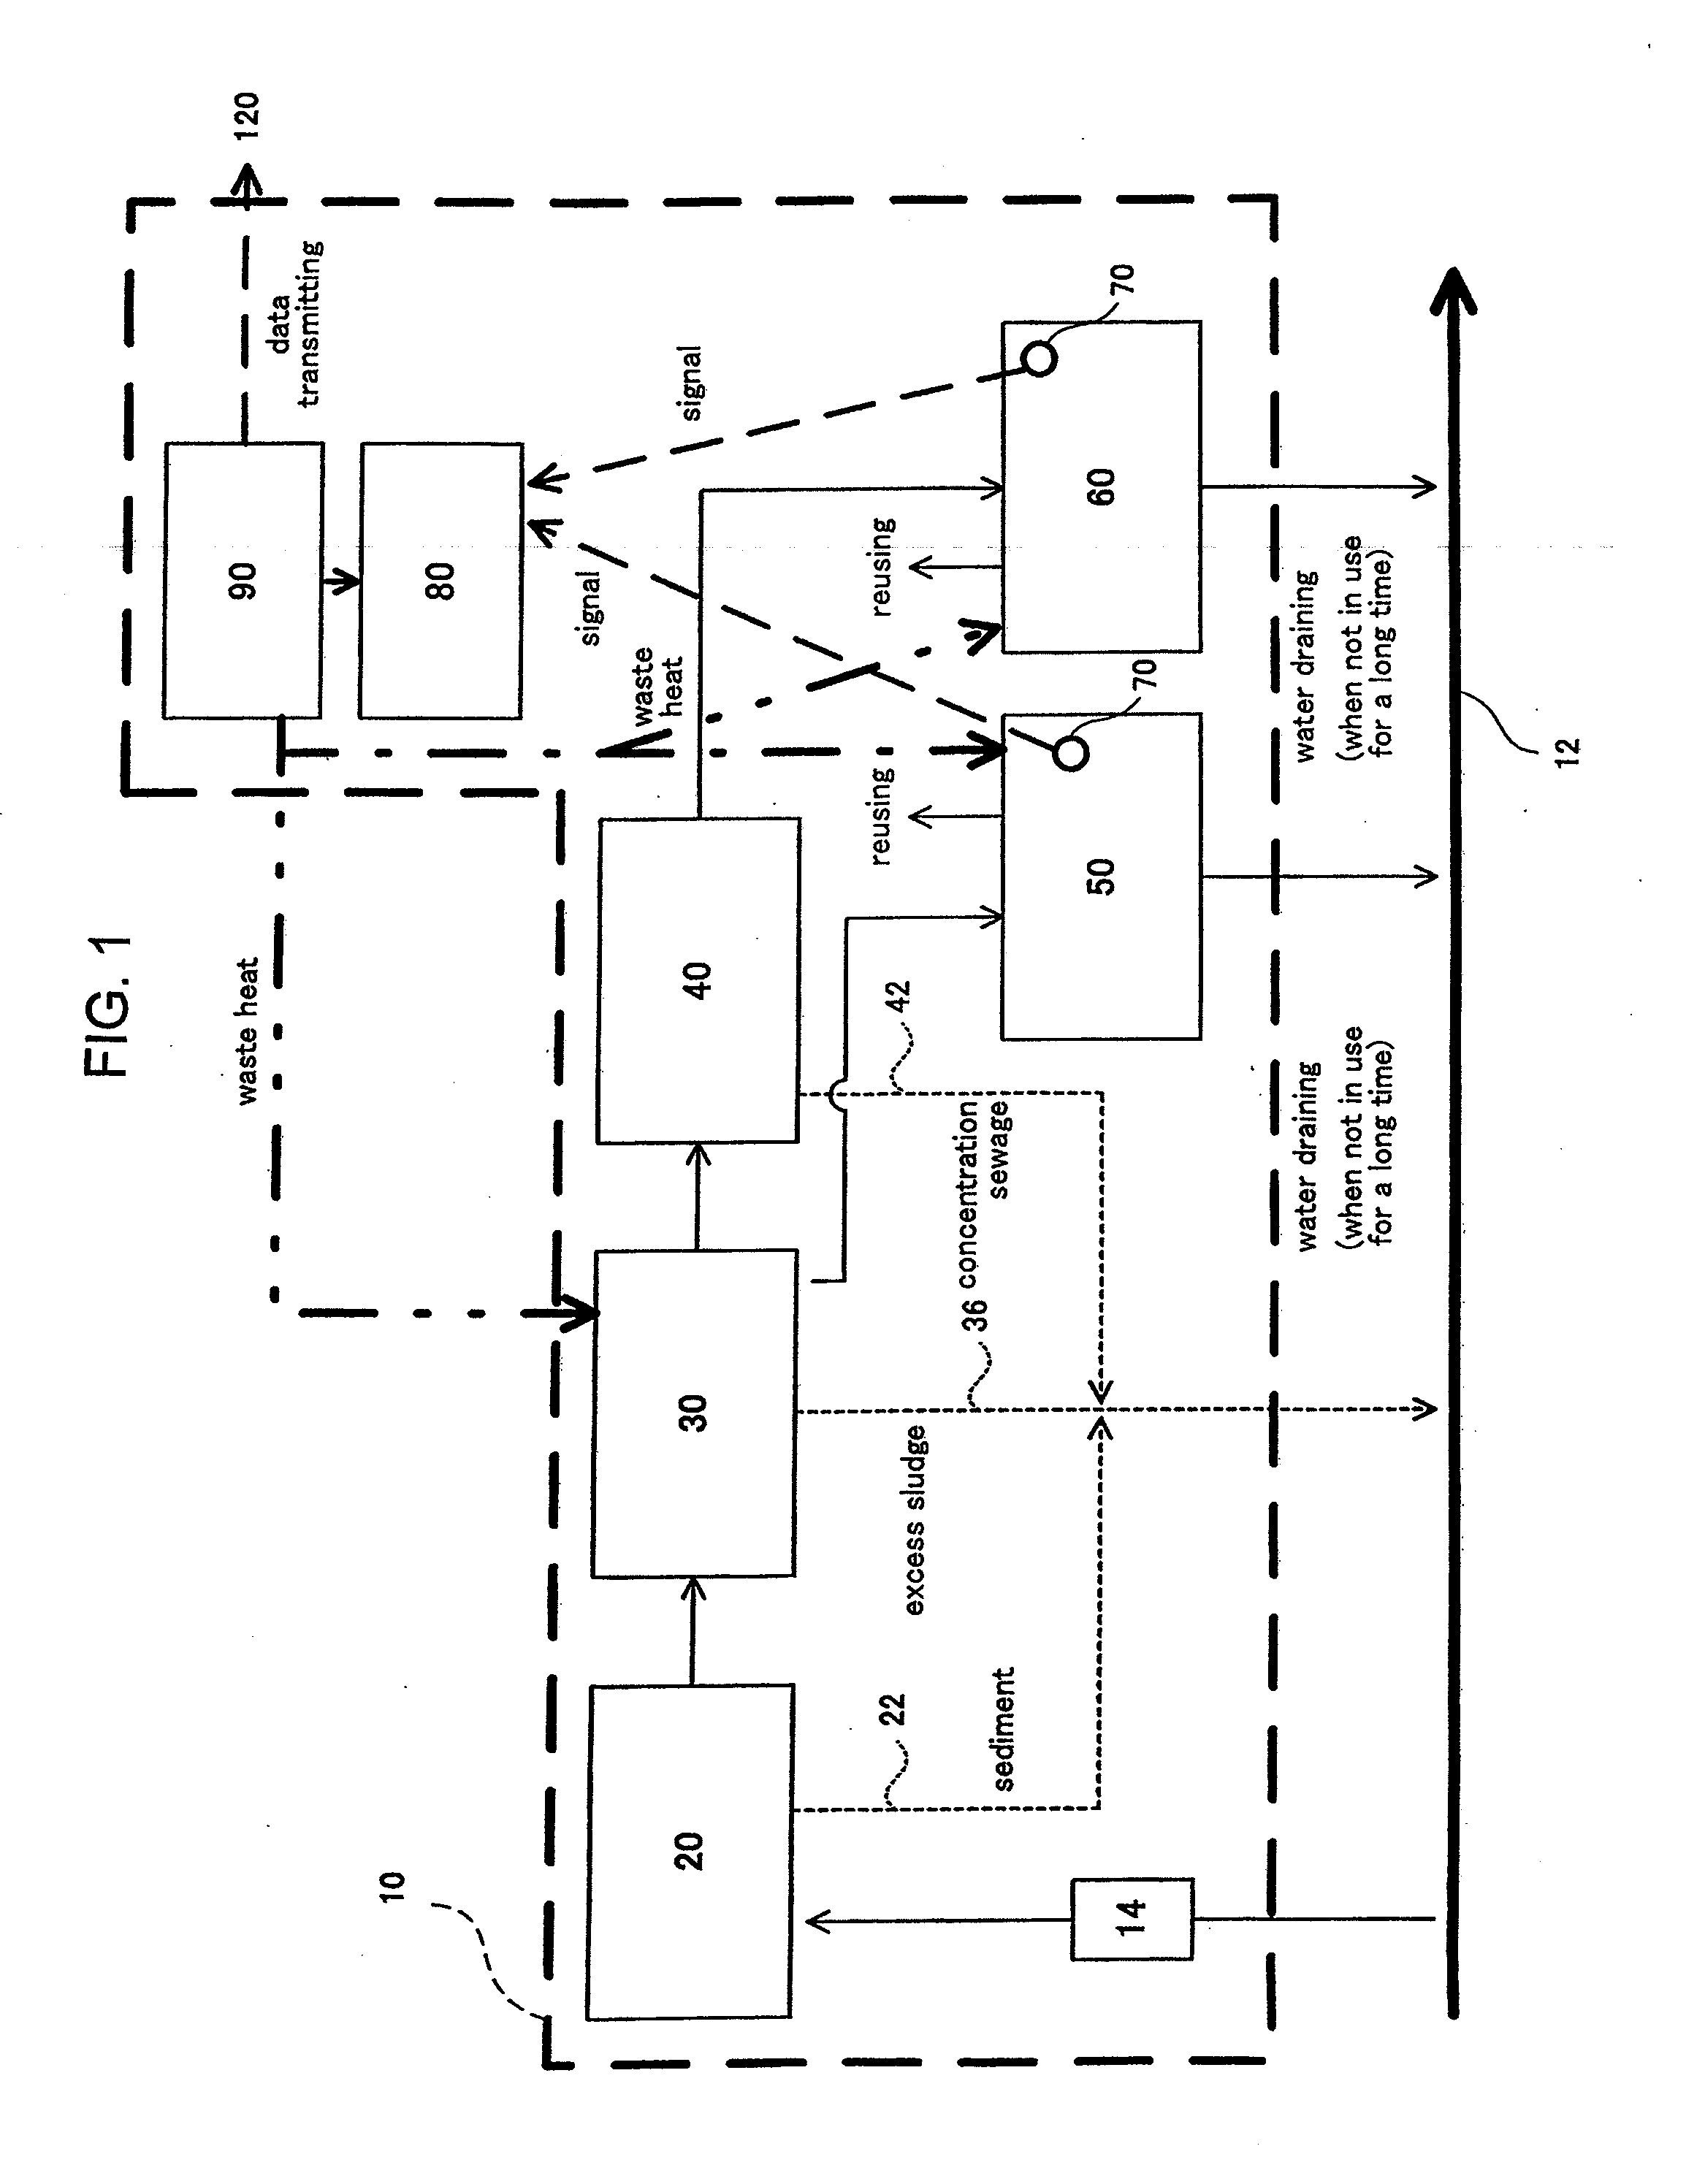 Sewage treatment apparatus and sewage reuse system